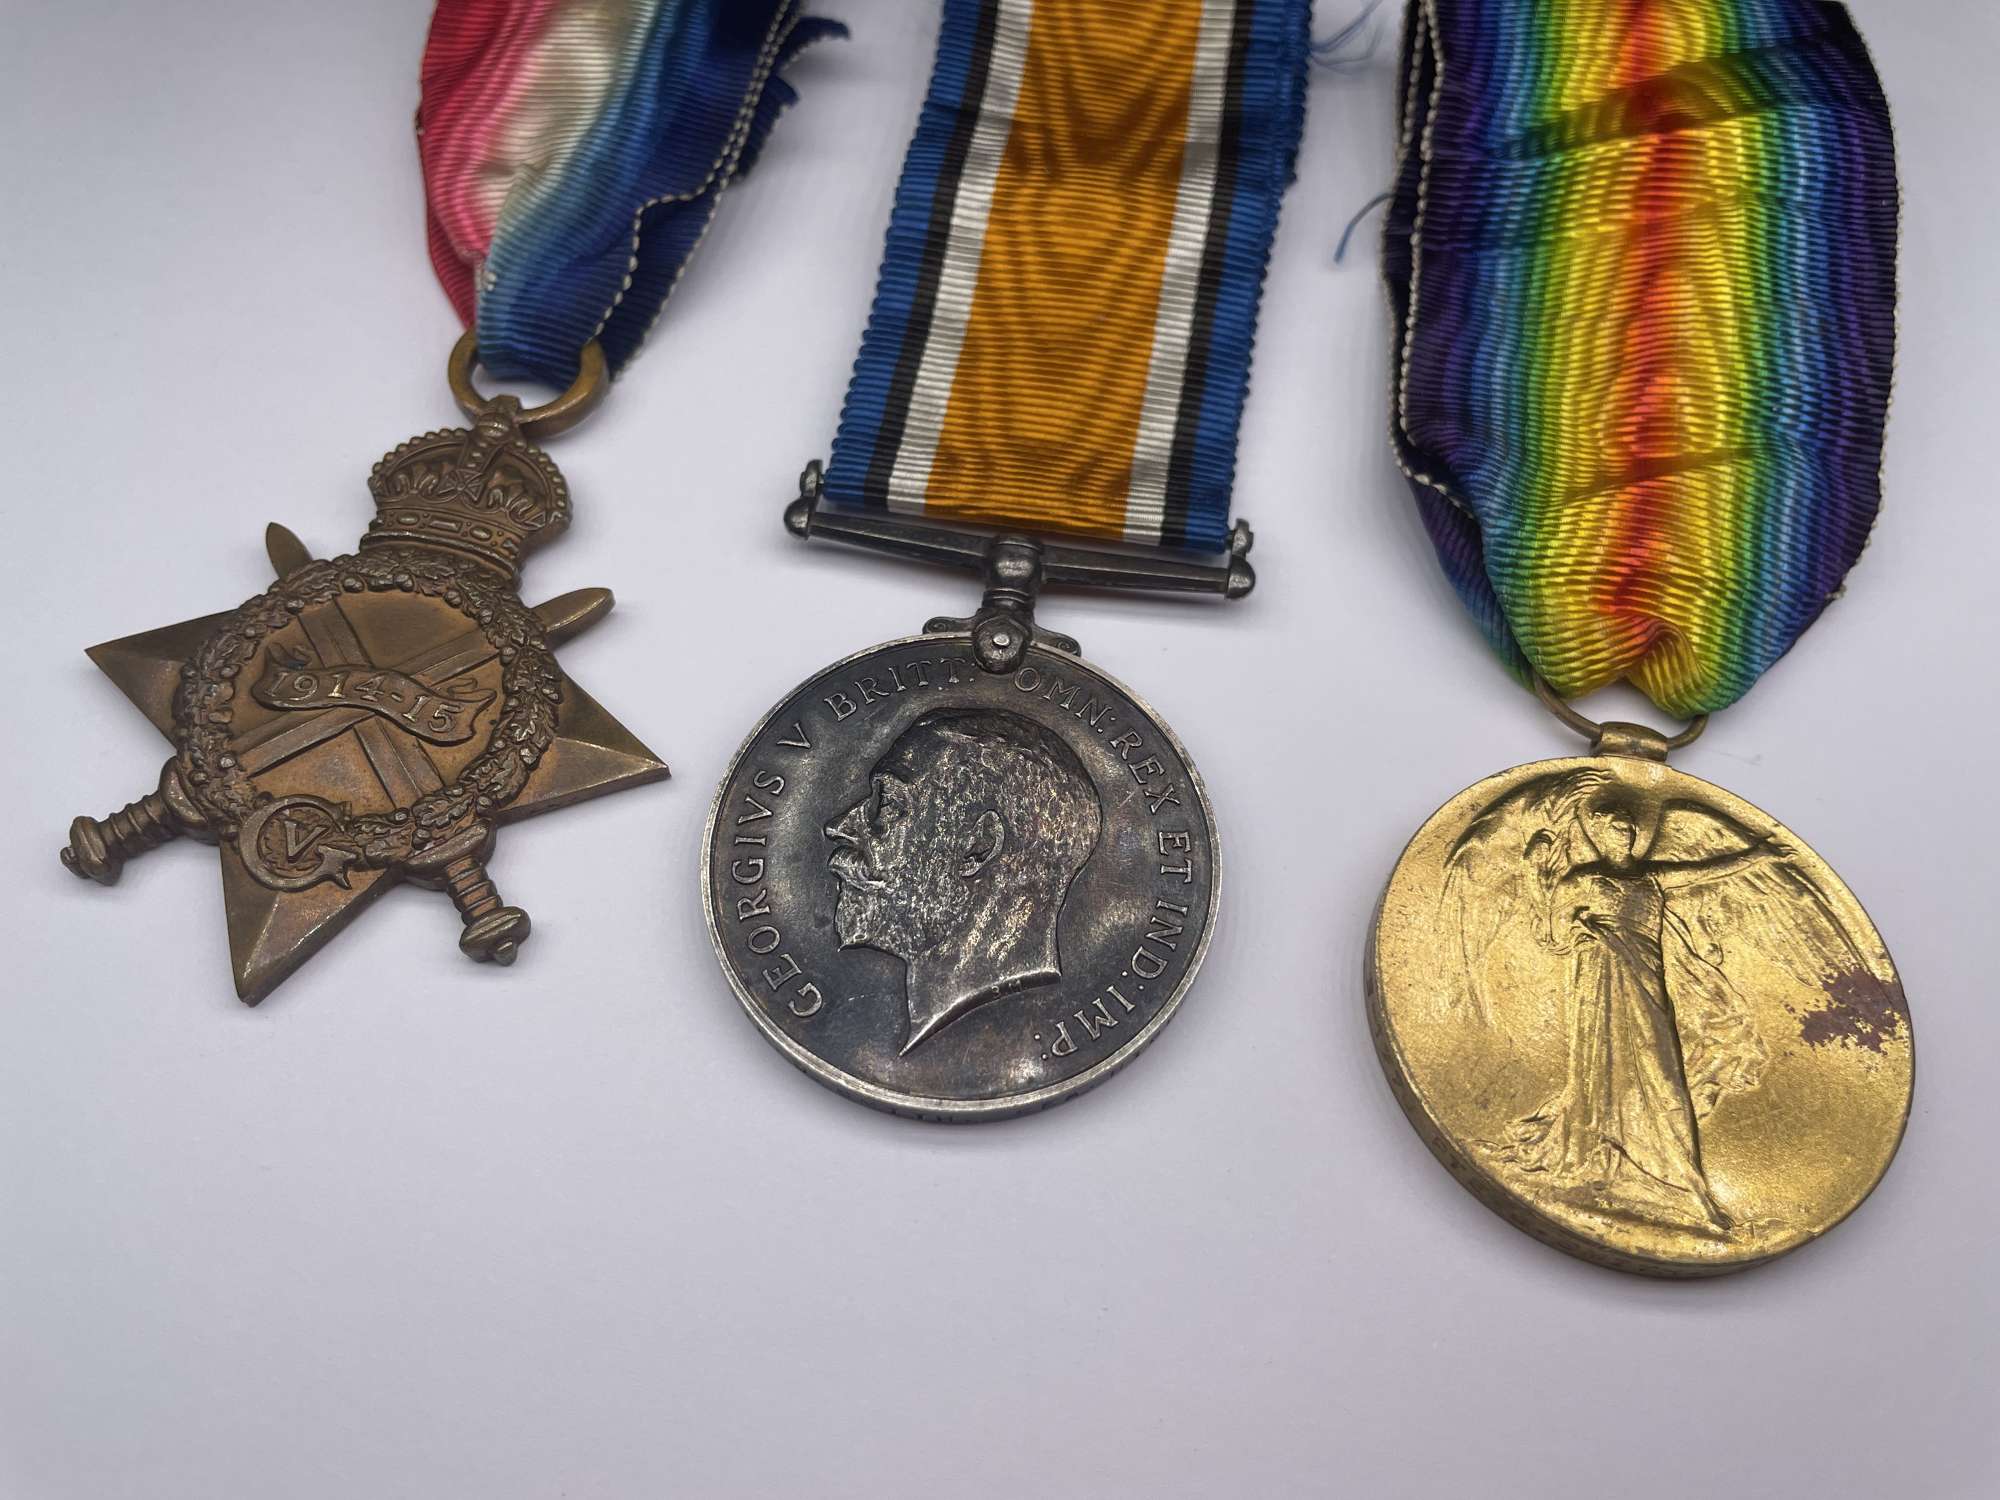 Original World War One Medal Trio, Pte Smith, Seaforth Highlanders, Casualy/Died of Wounds